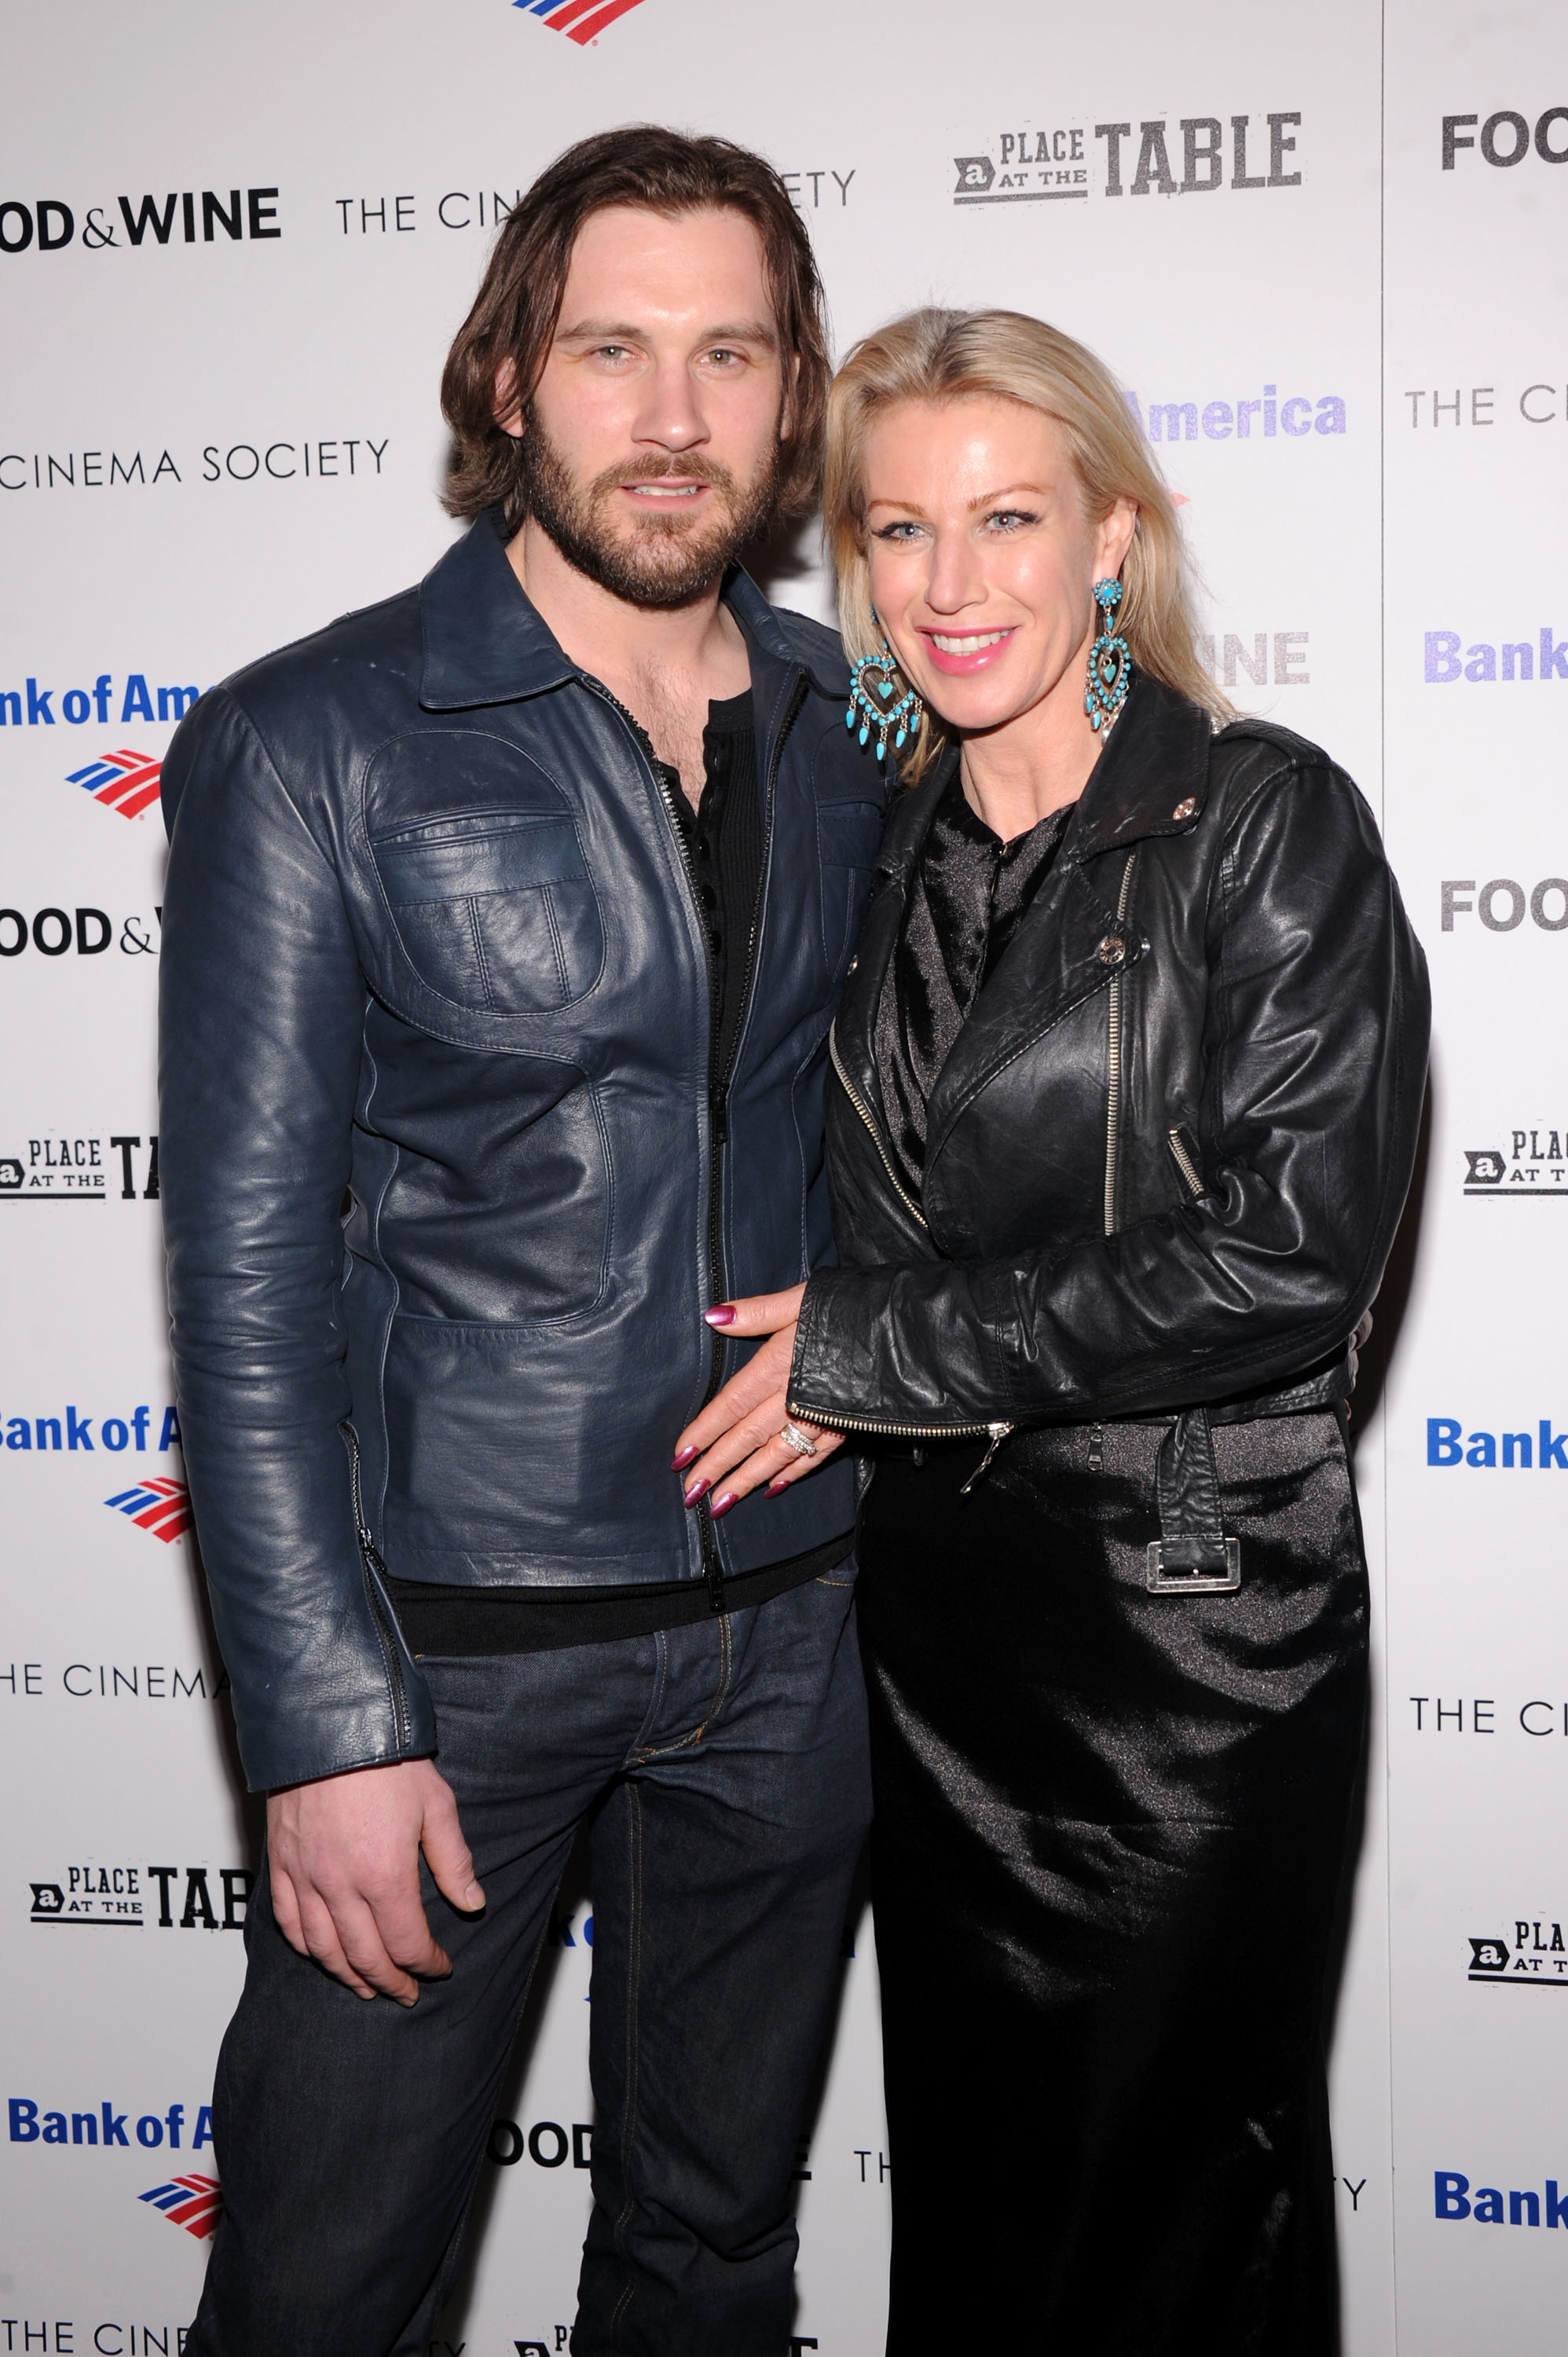 Clive Standen and Francesca Standen attend the screening of "A Place At The Table" presented by Magnolia Pictures and Participant Media, in association with The Cinema Society, at the MOMA - Celeste Bartos Theater on February 27, 2013, in New York City. | Source: Getty Images